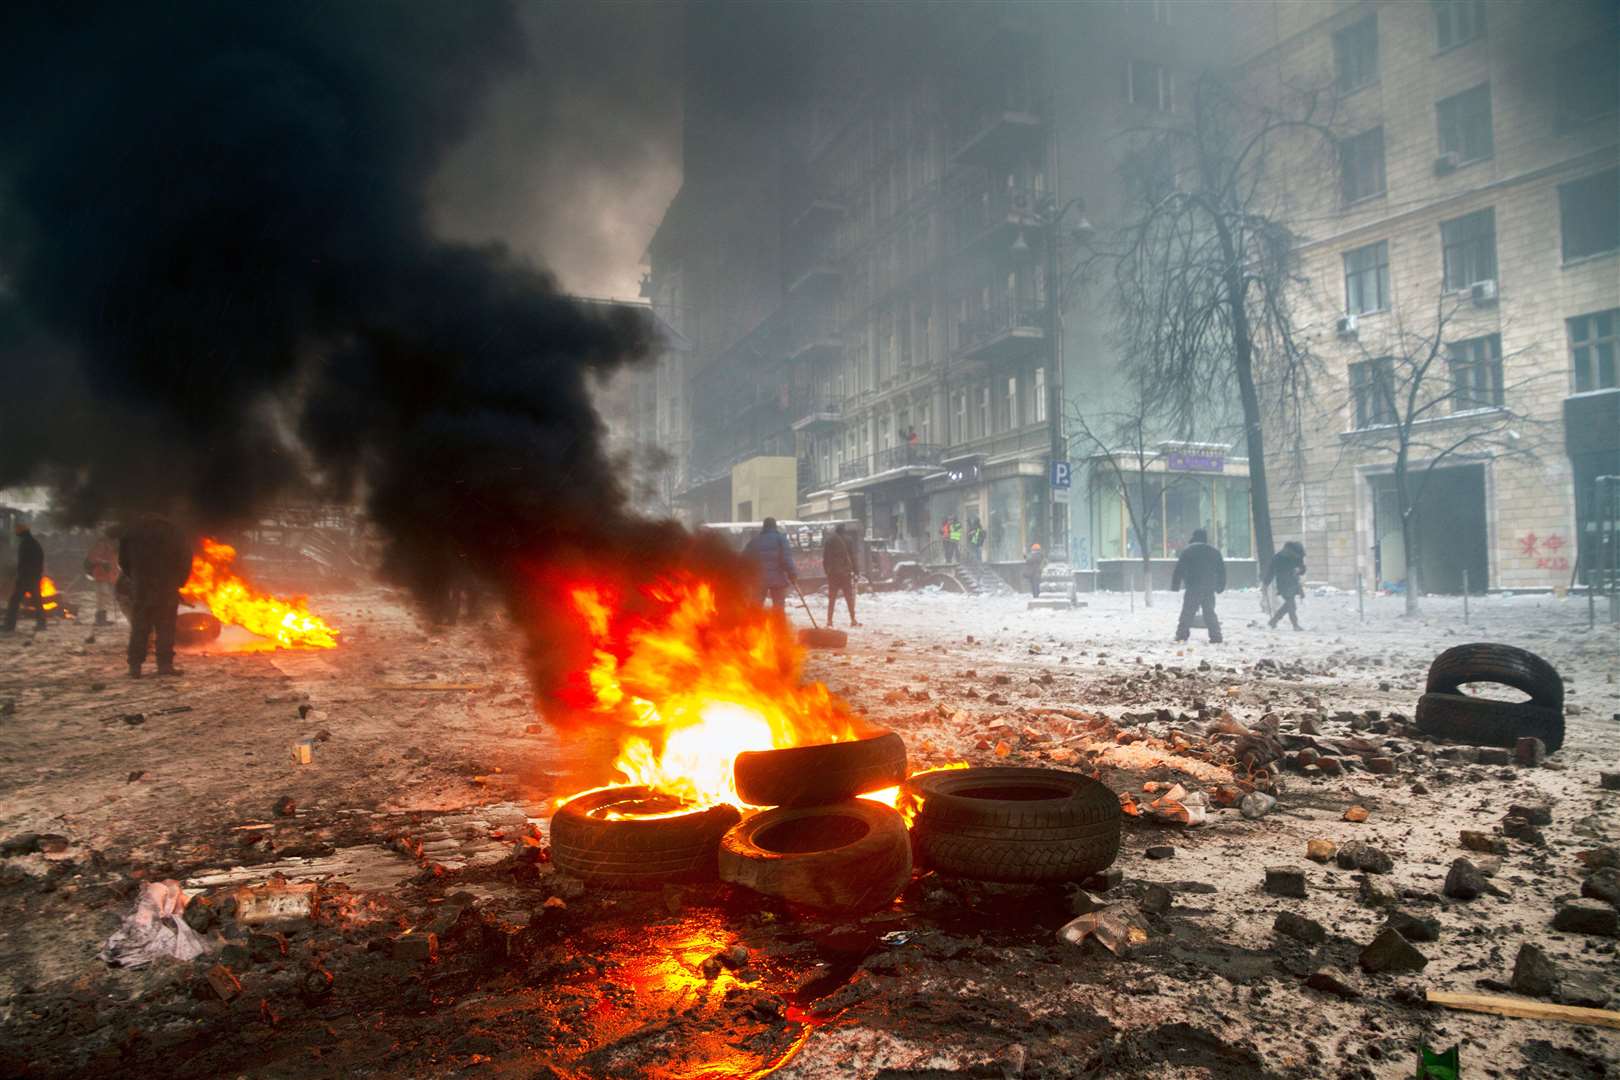 Scammers are using the Ukraine crisis to extort money from people.